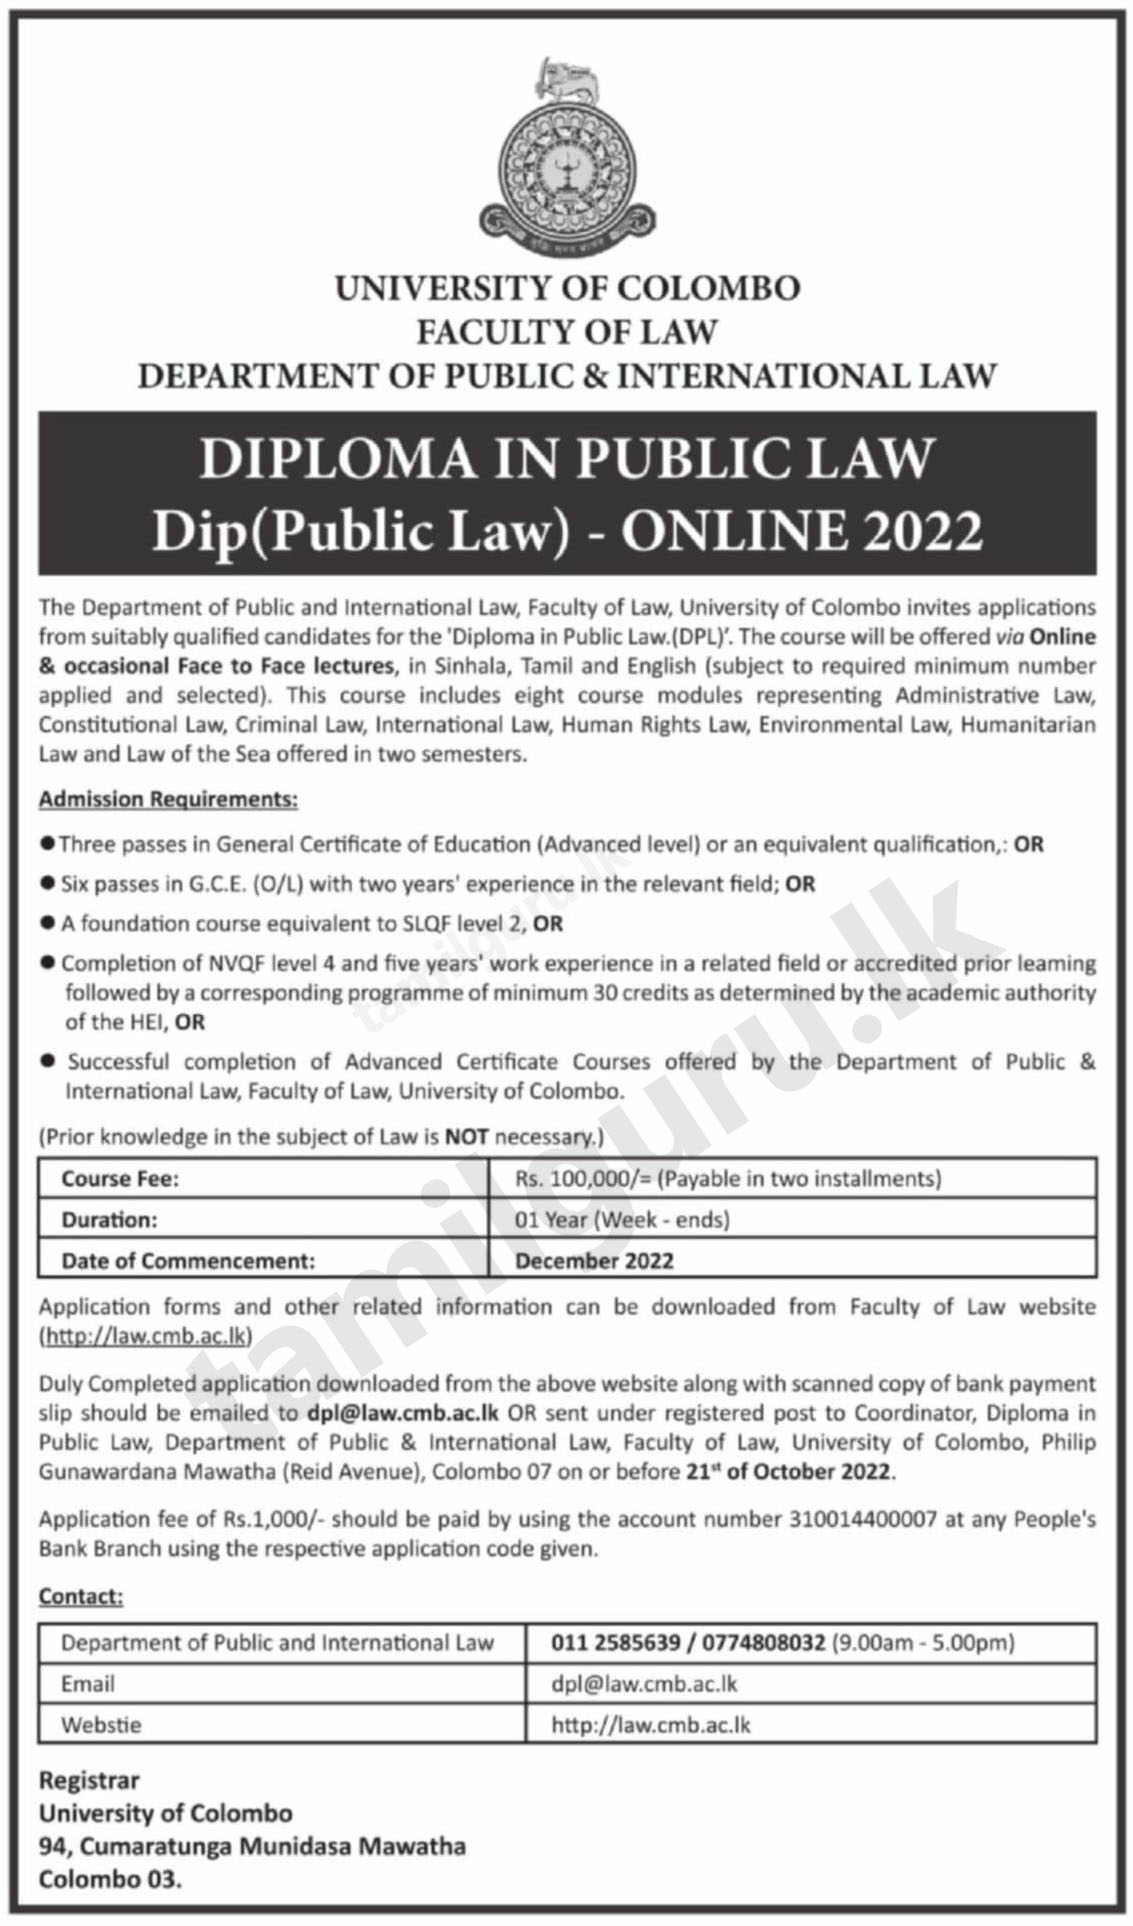 Diploma in Public Law (Online Mode) (2022) Application - University of Colombo